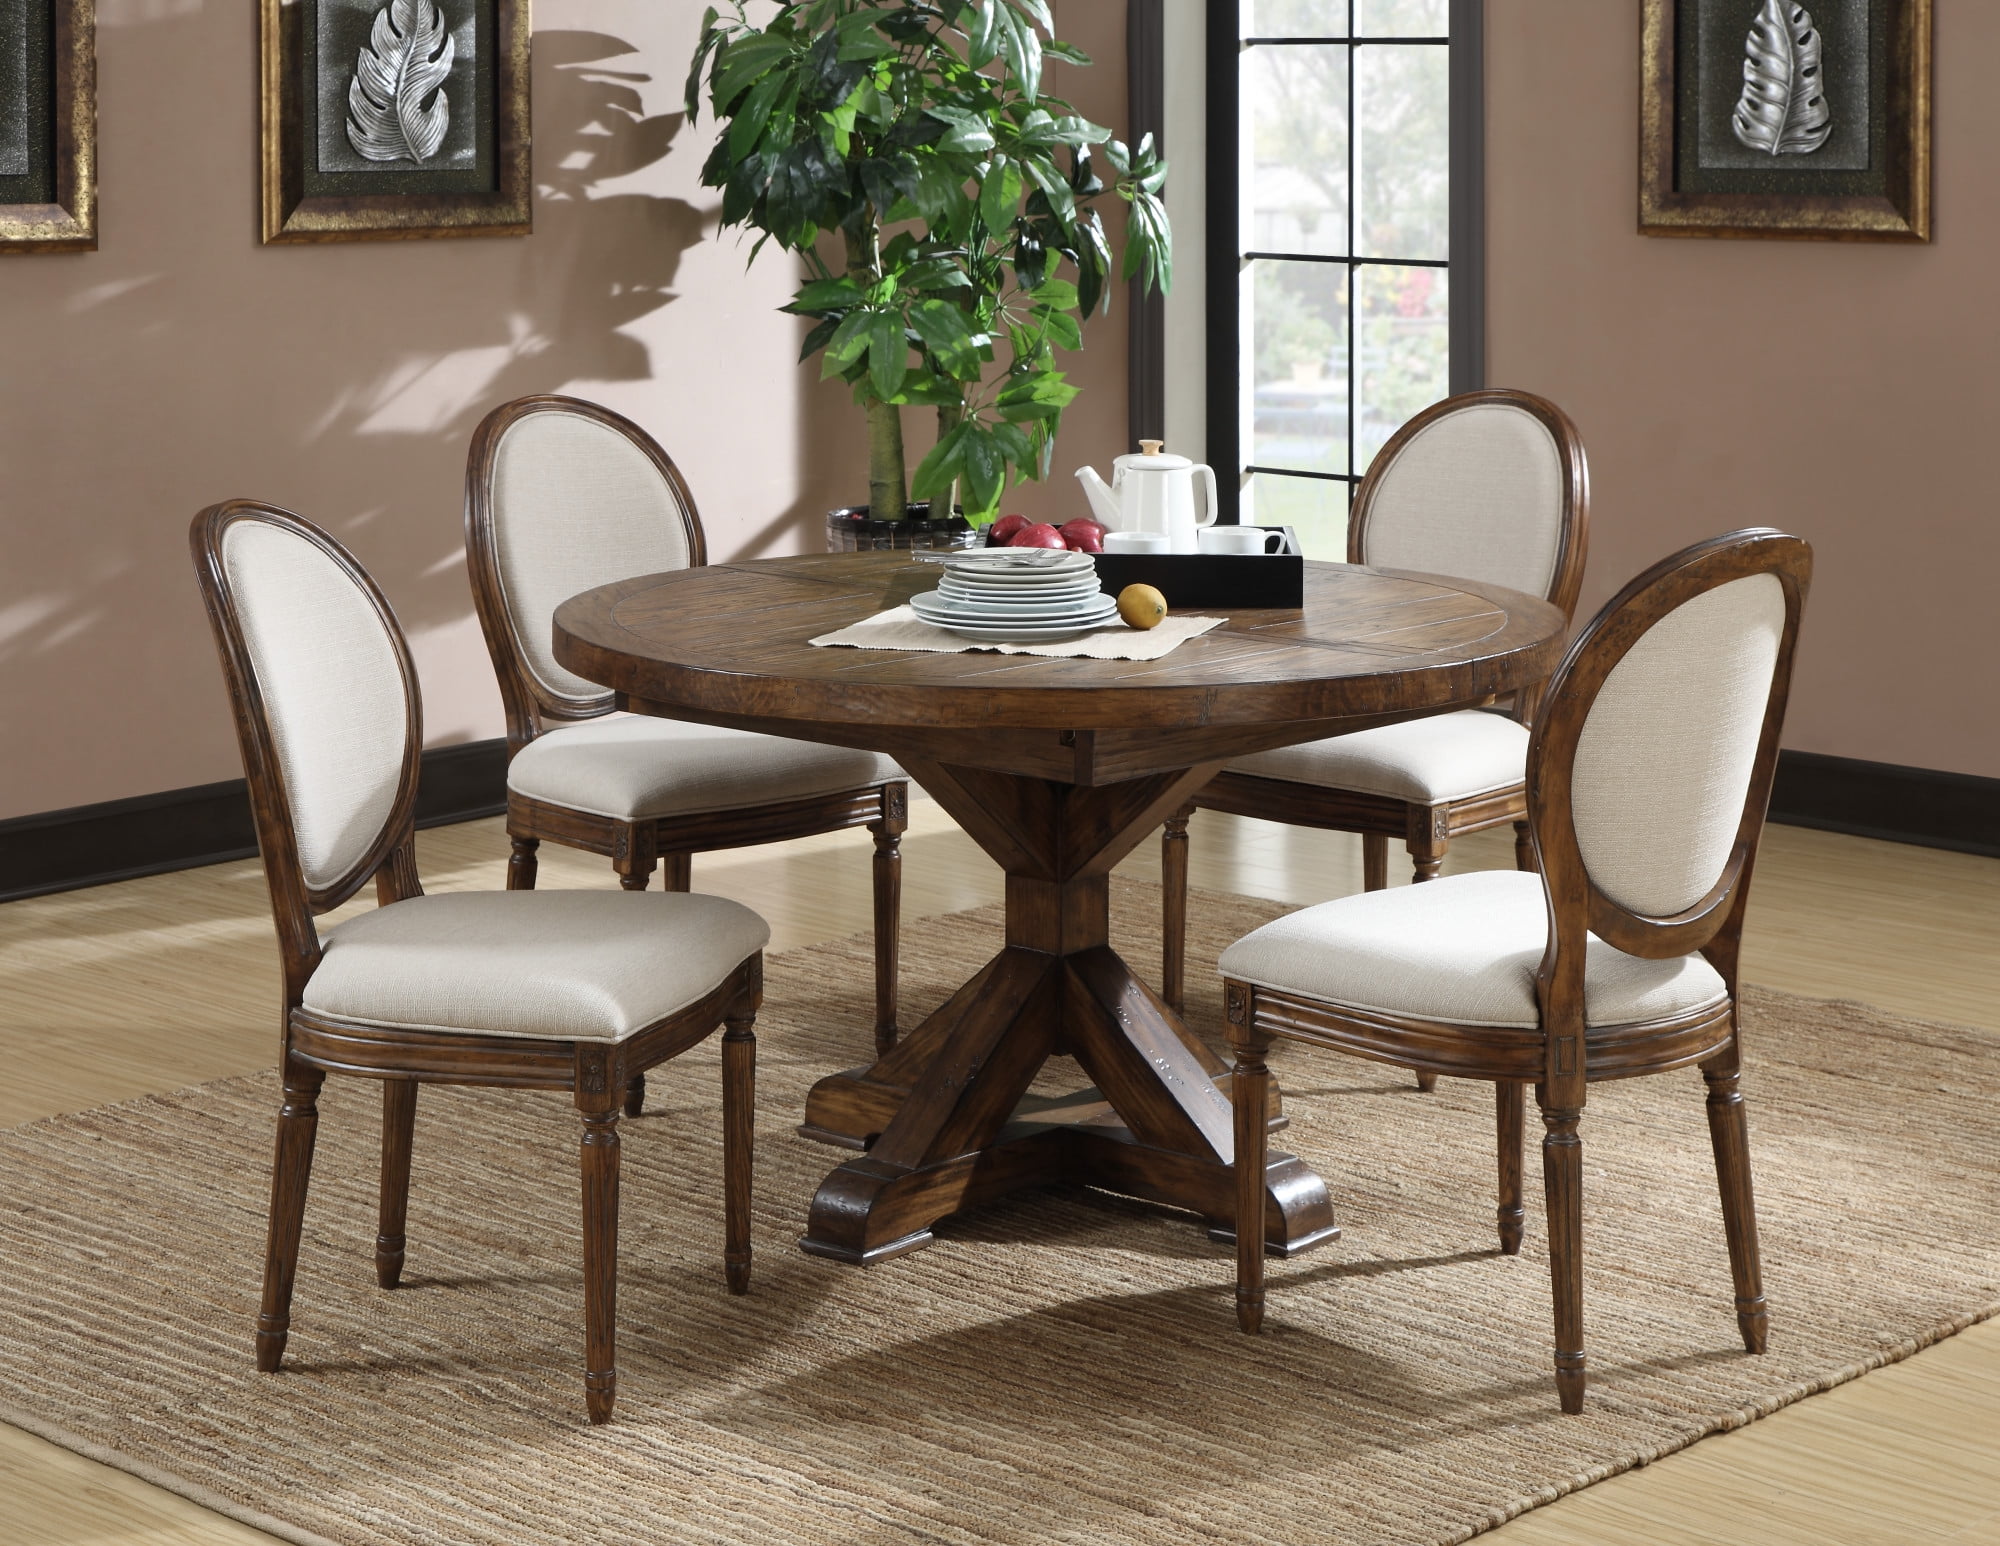 Wallace And Bay Dodson Brindled Pine 54 Round Dining Table With